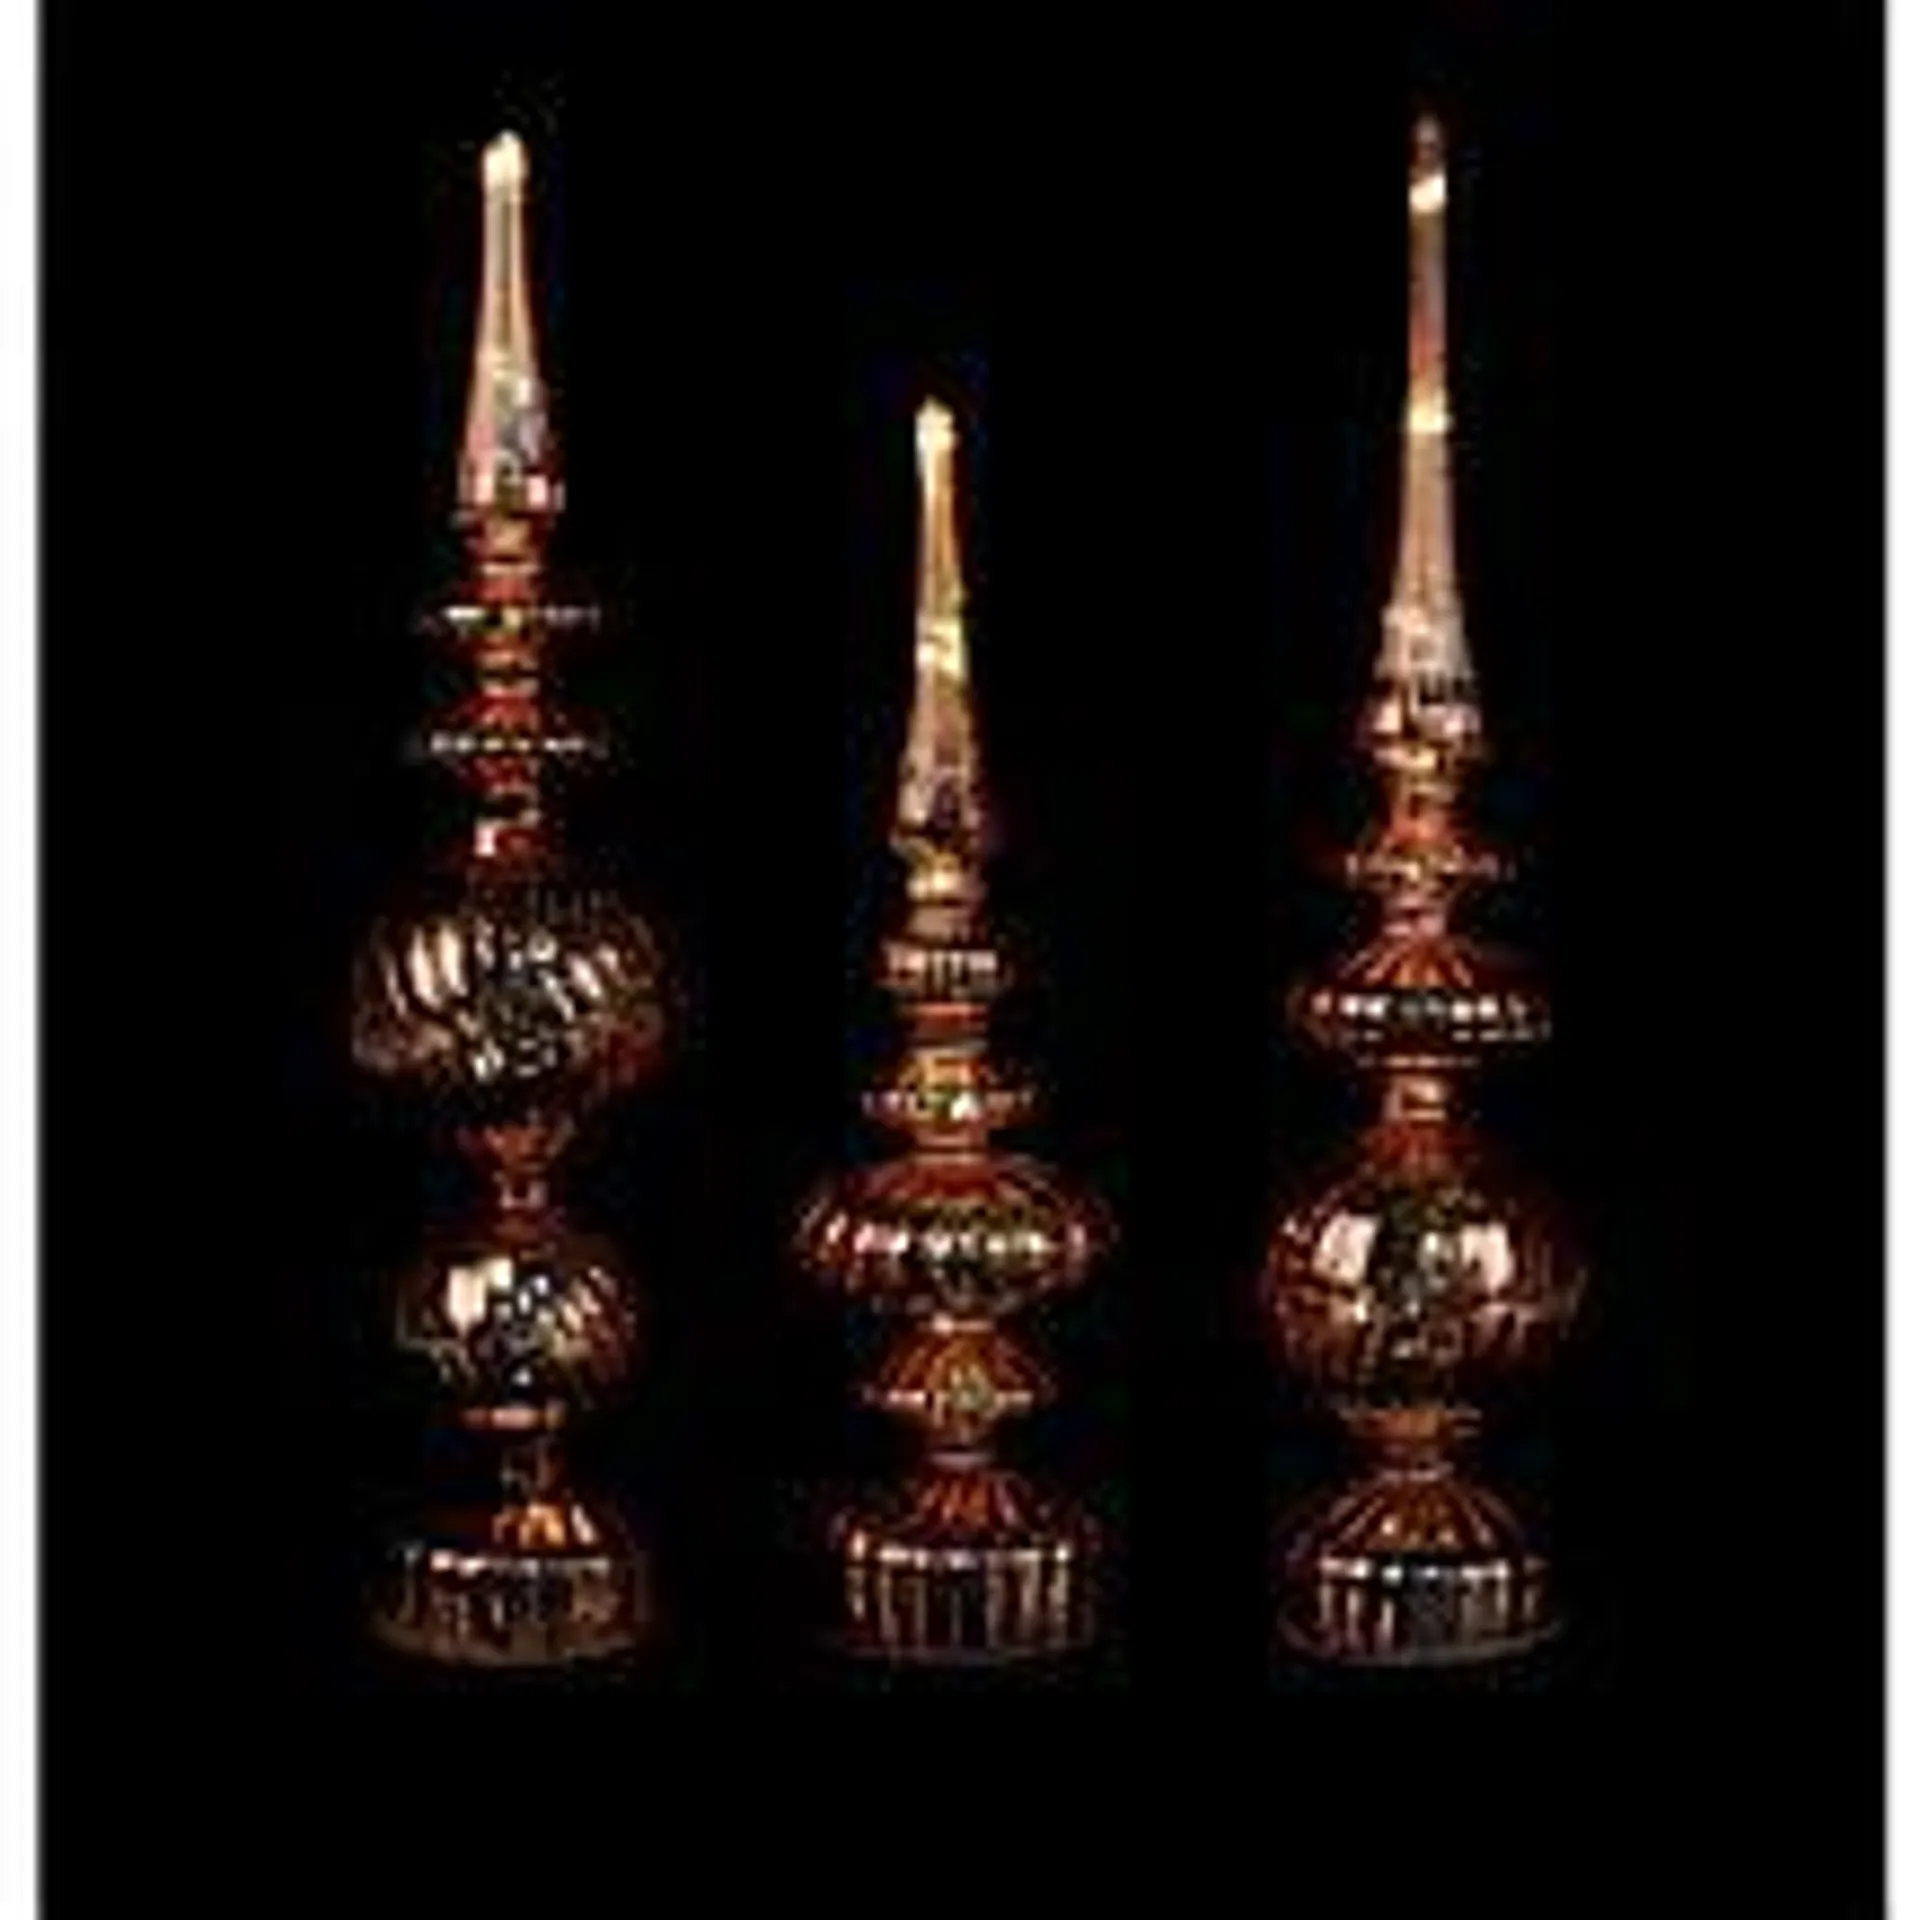 Alison at Home Illuminated Glass Finials with Timers 3-piece Set